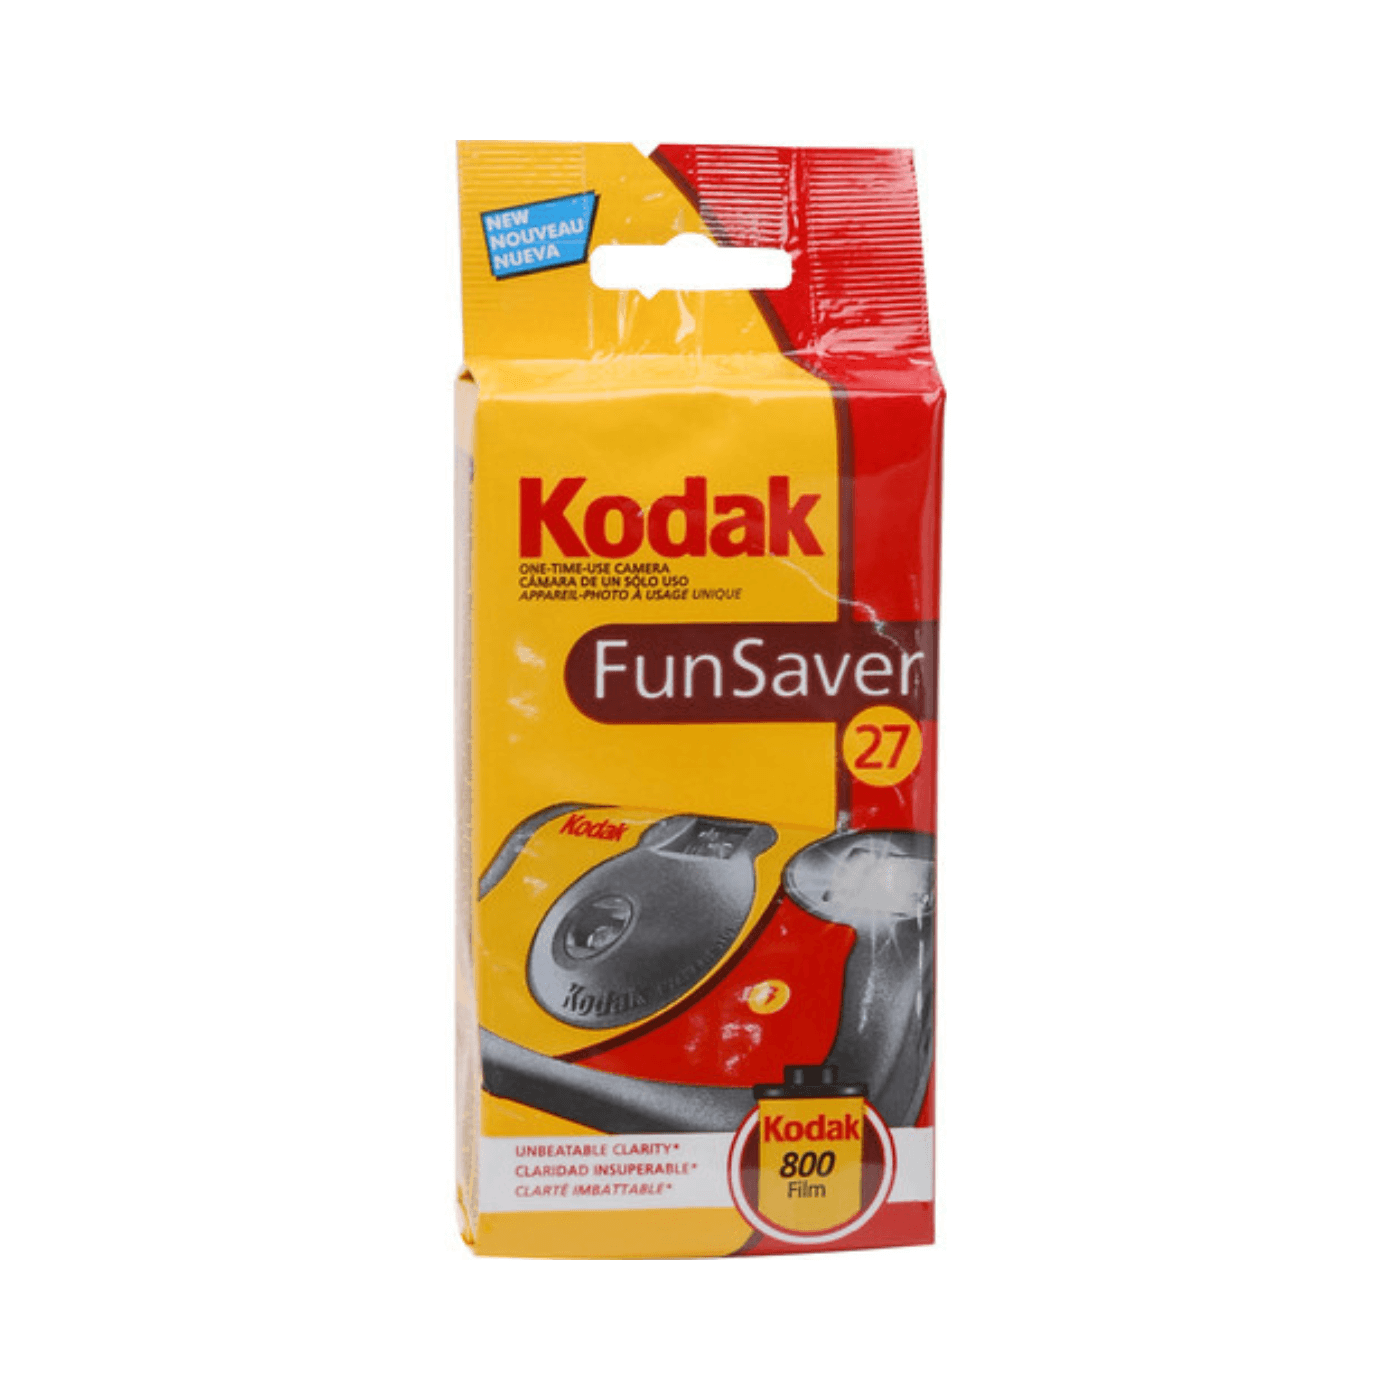 Kodak FunSaver 35mm One-Time-Use Disposable Camera (ISO-800 27Exp) with Flash